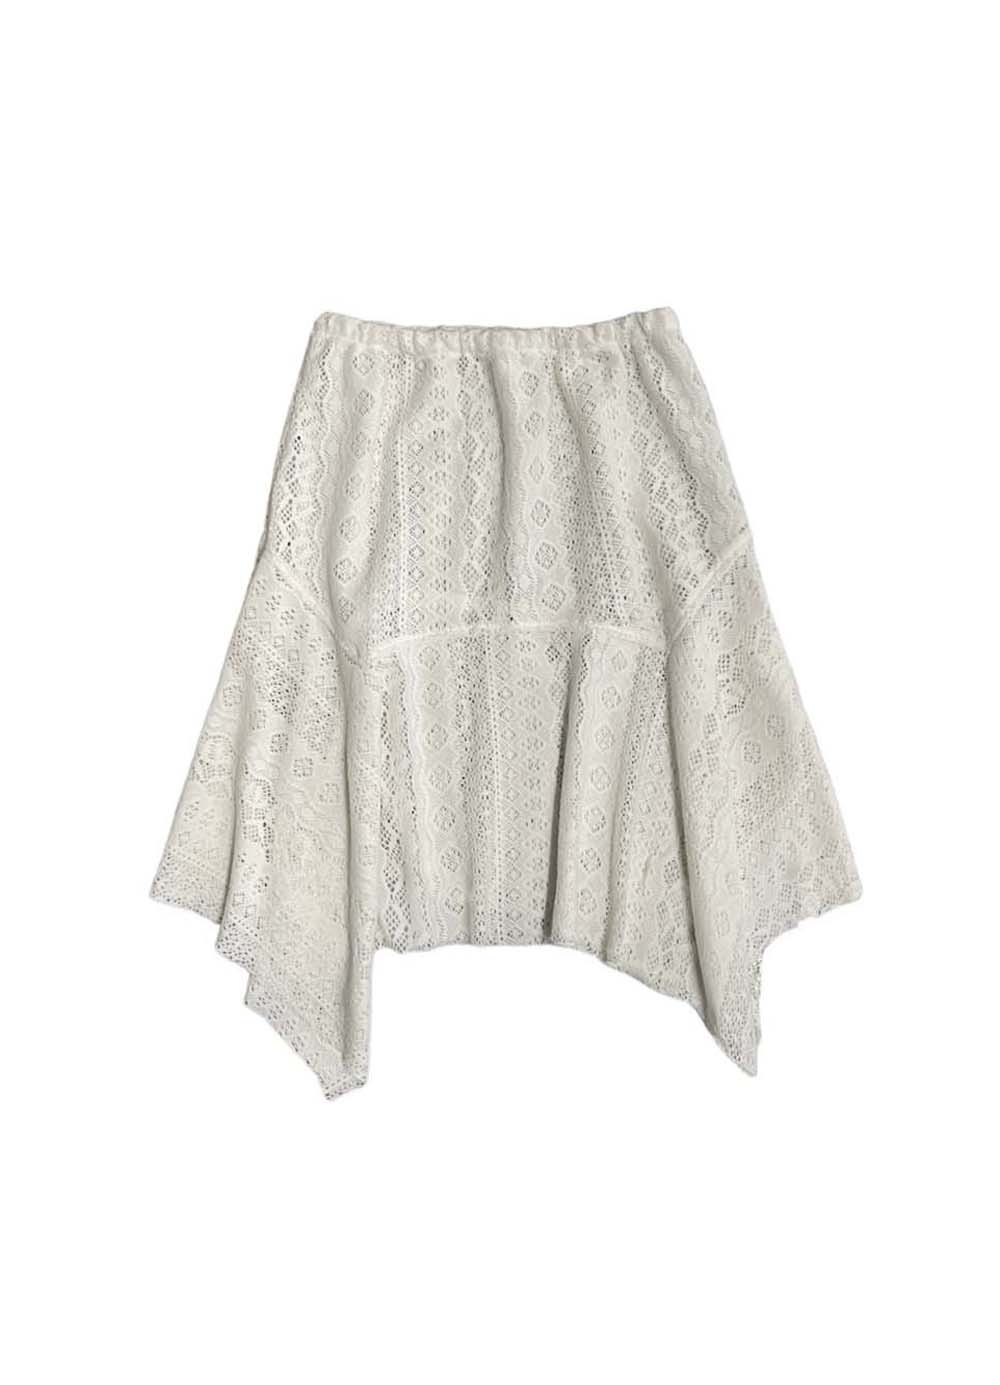 Lace Layered Skirt (2colors)